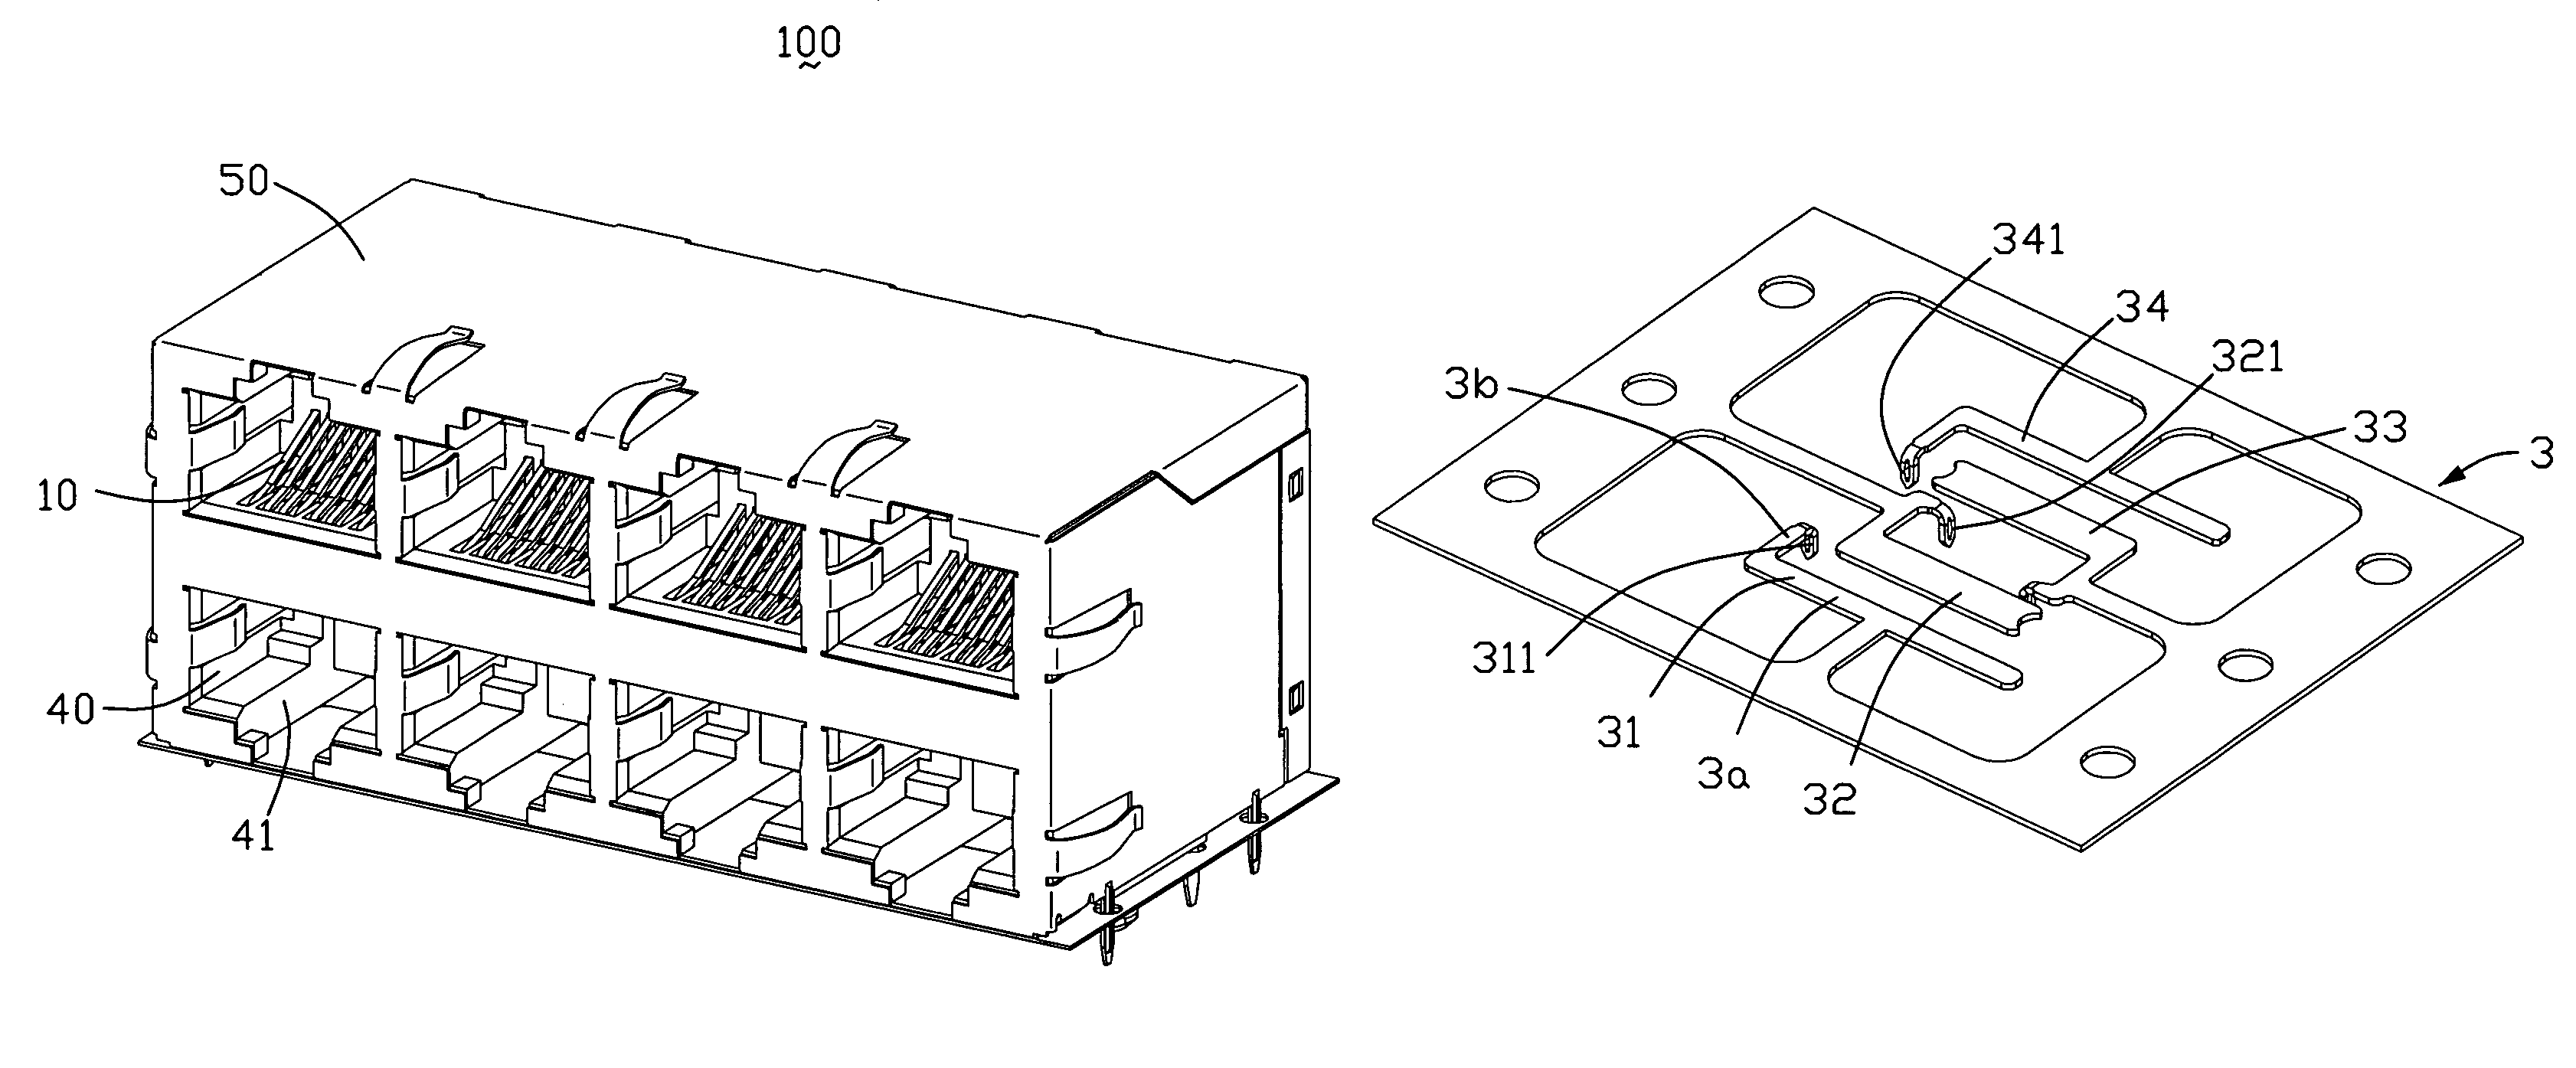 Electrical connector configured by wafer having coupling lead-frame and method for making the same